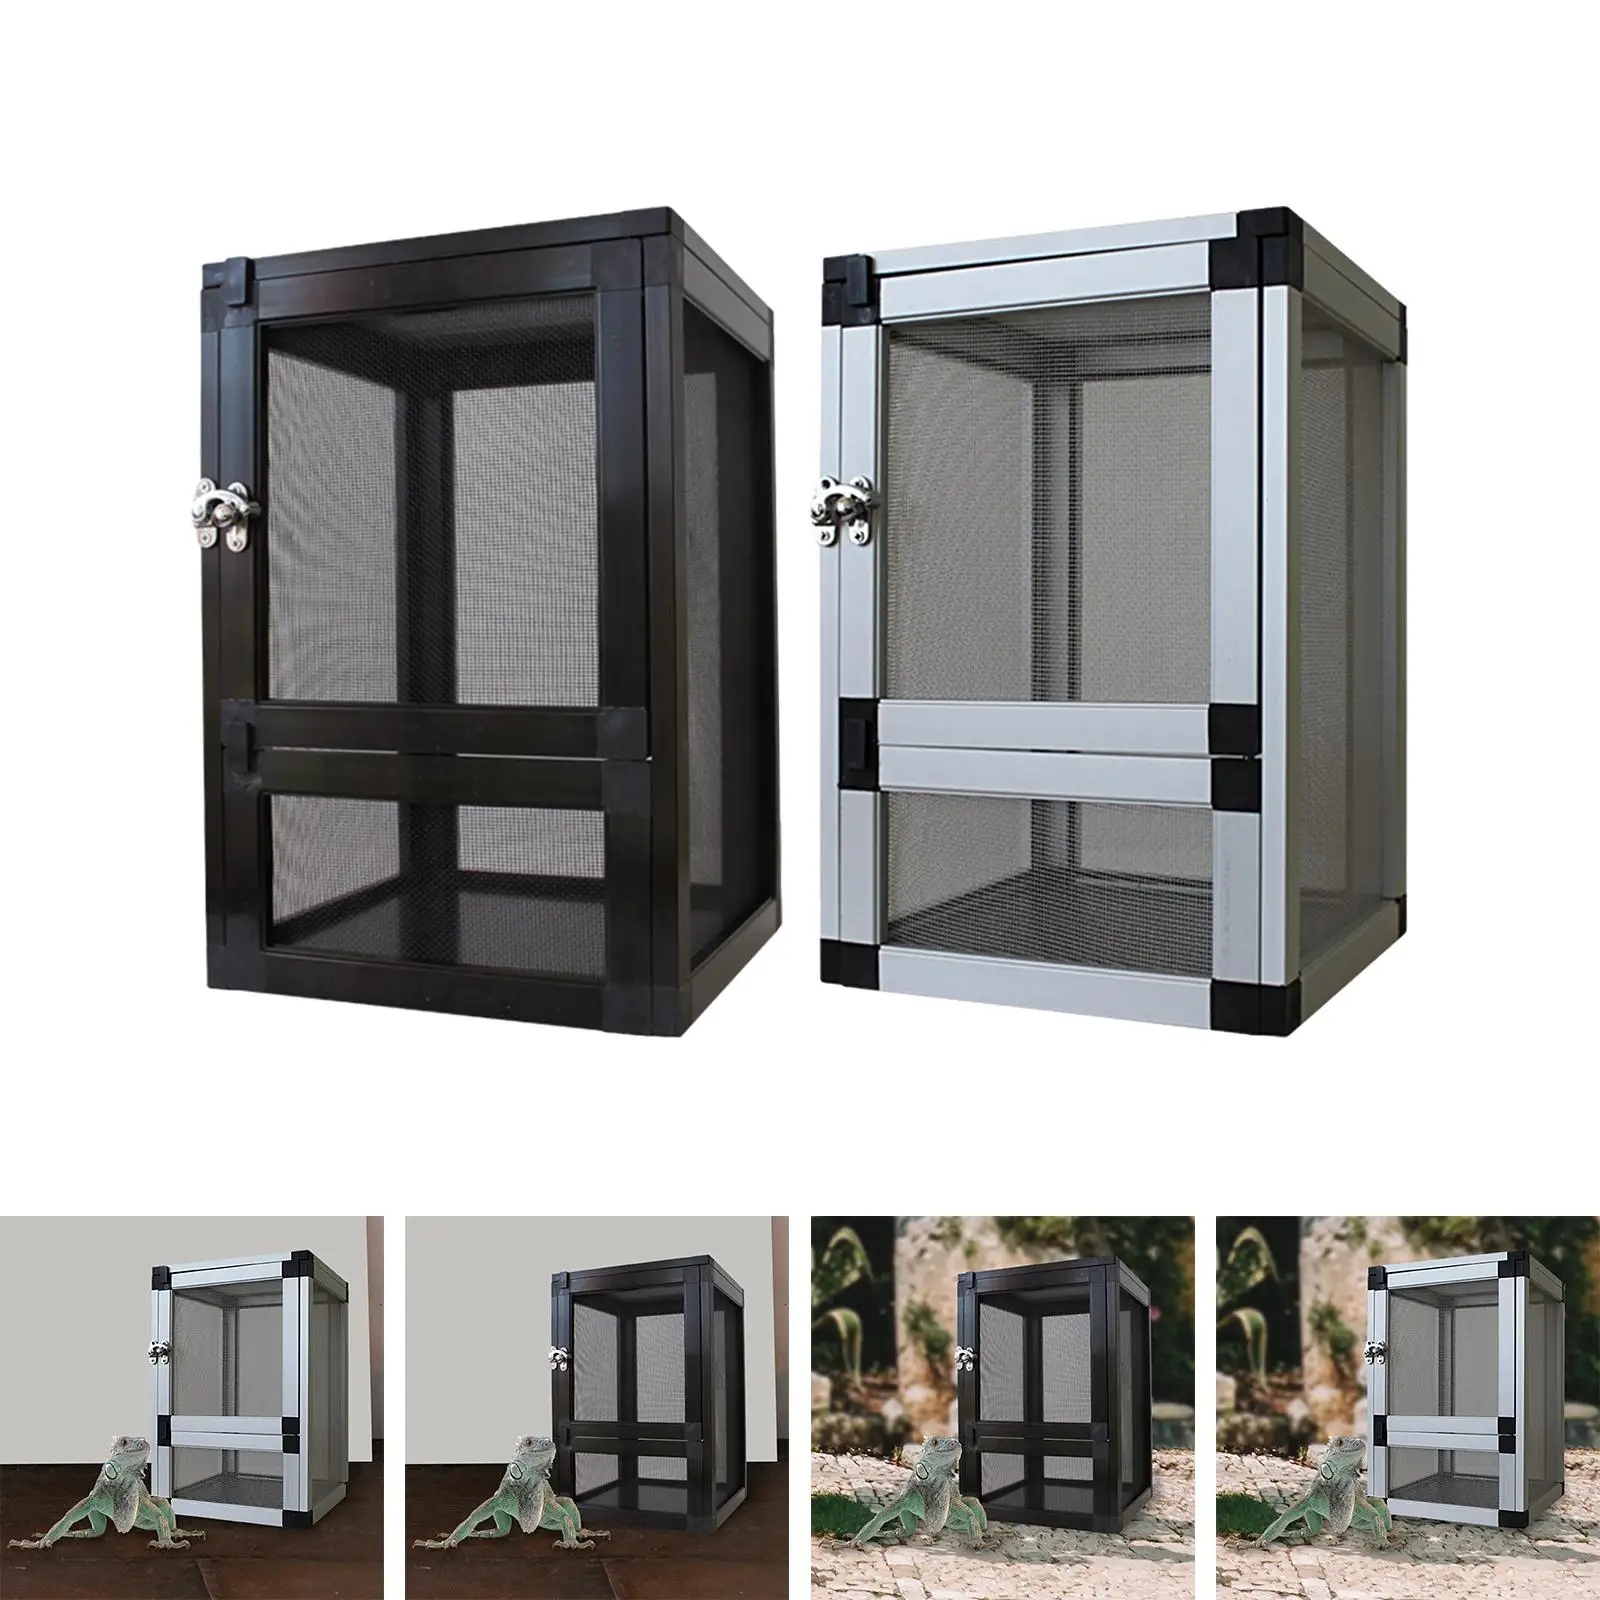 Air Screen Cages Storage Portable Reptile Cage Reptiles Habitat Breeding Box for Bearded Dragon Hedgehogs Gecko Snake Gerbils